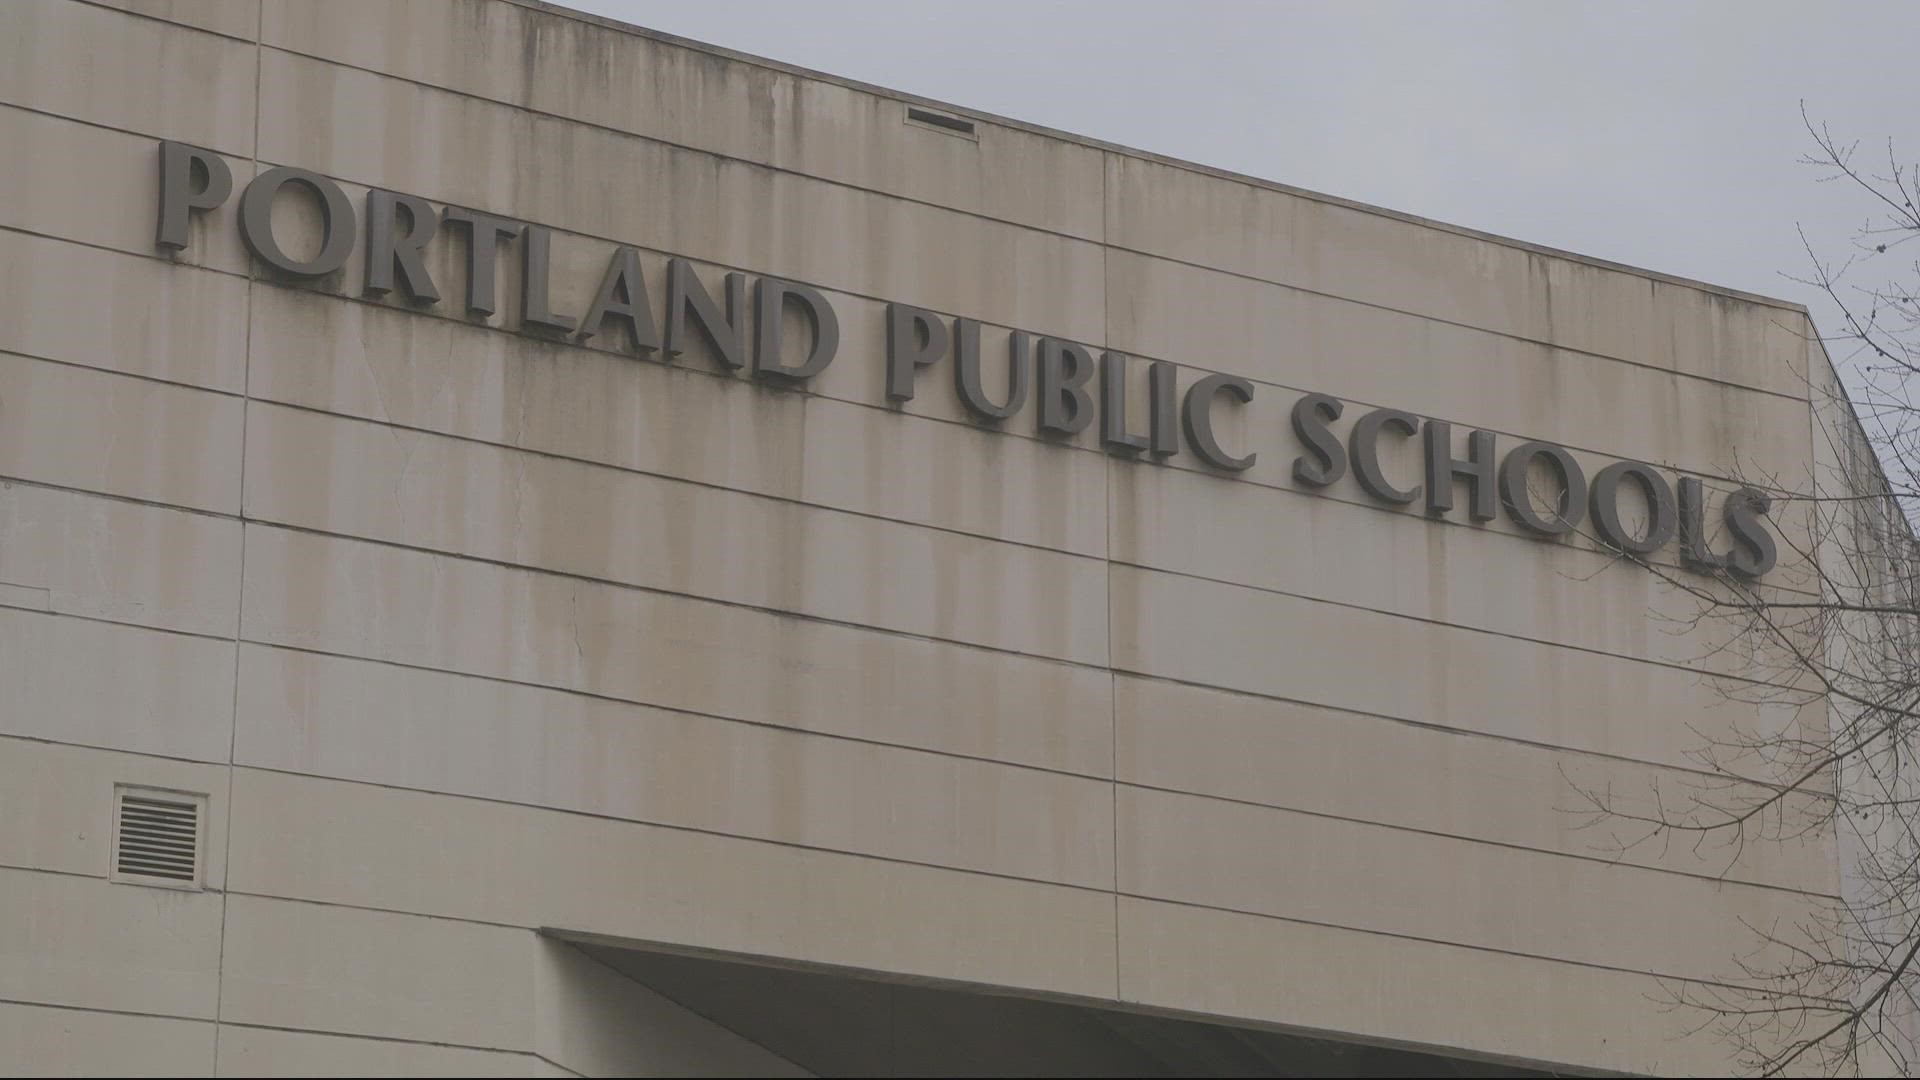 Portland Public Schools held a news conference Jan. 7 to discuss its COVID response and how the current surge in the omicron variant is impacting students and staff.